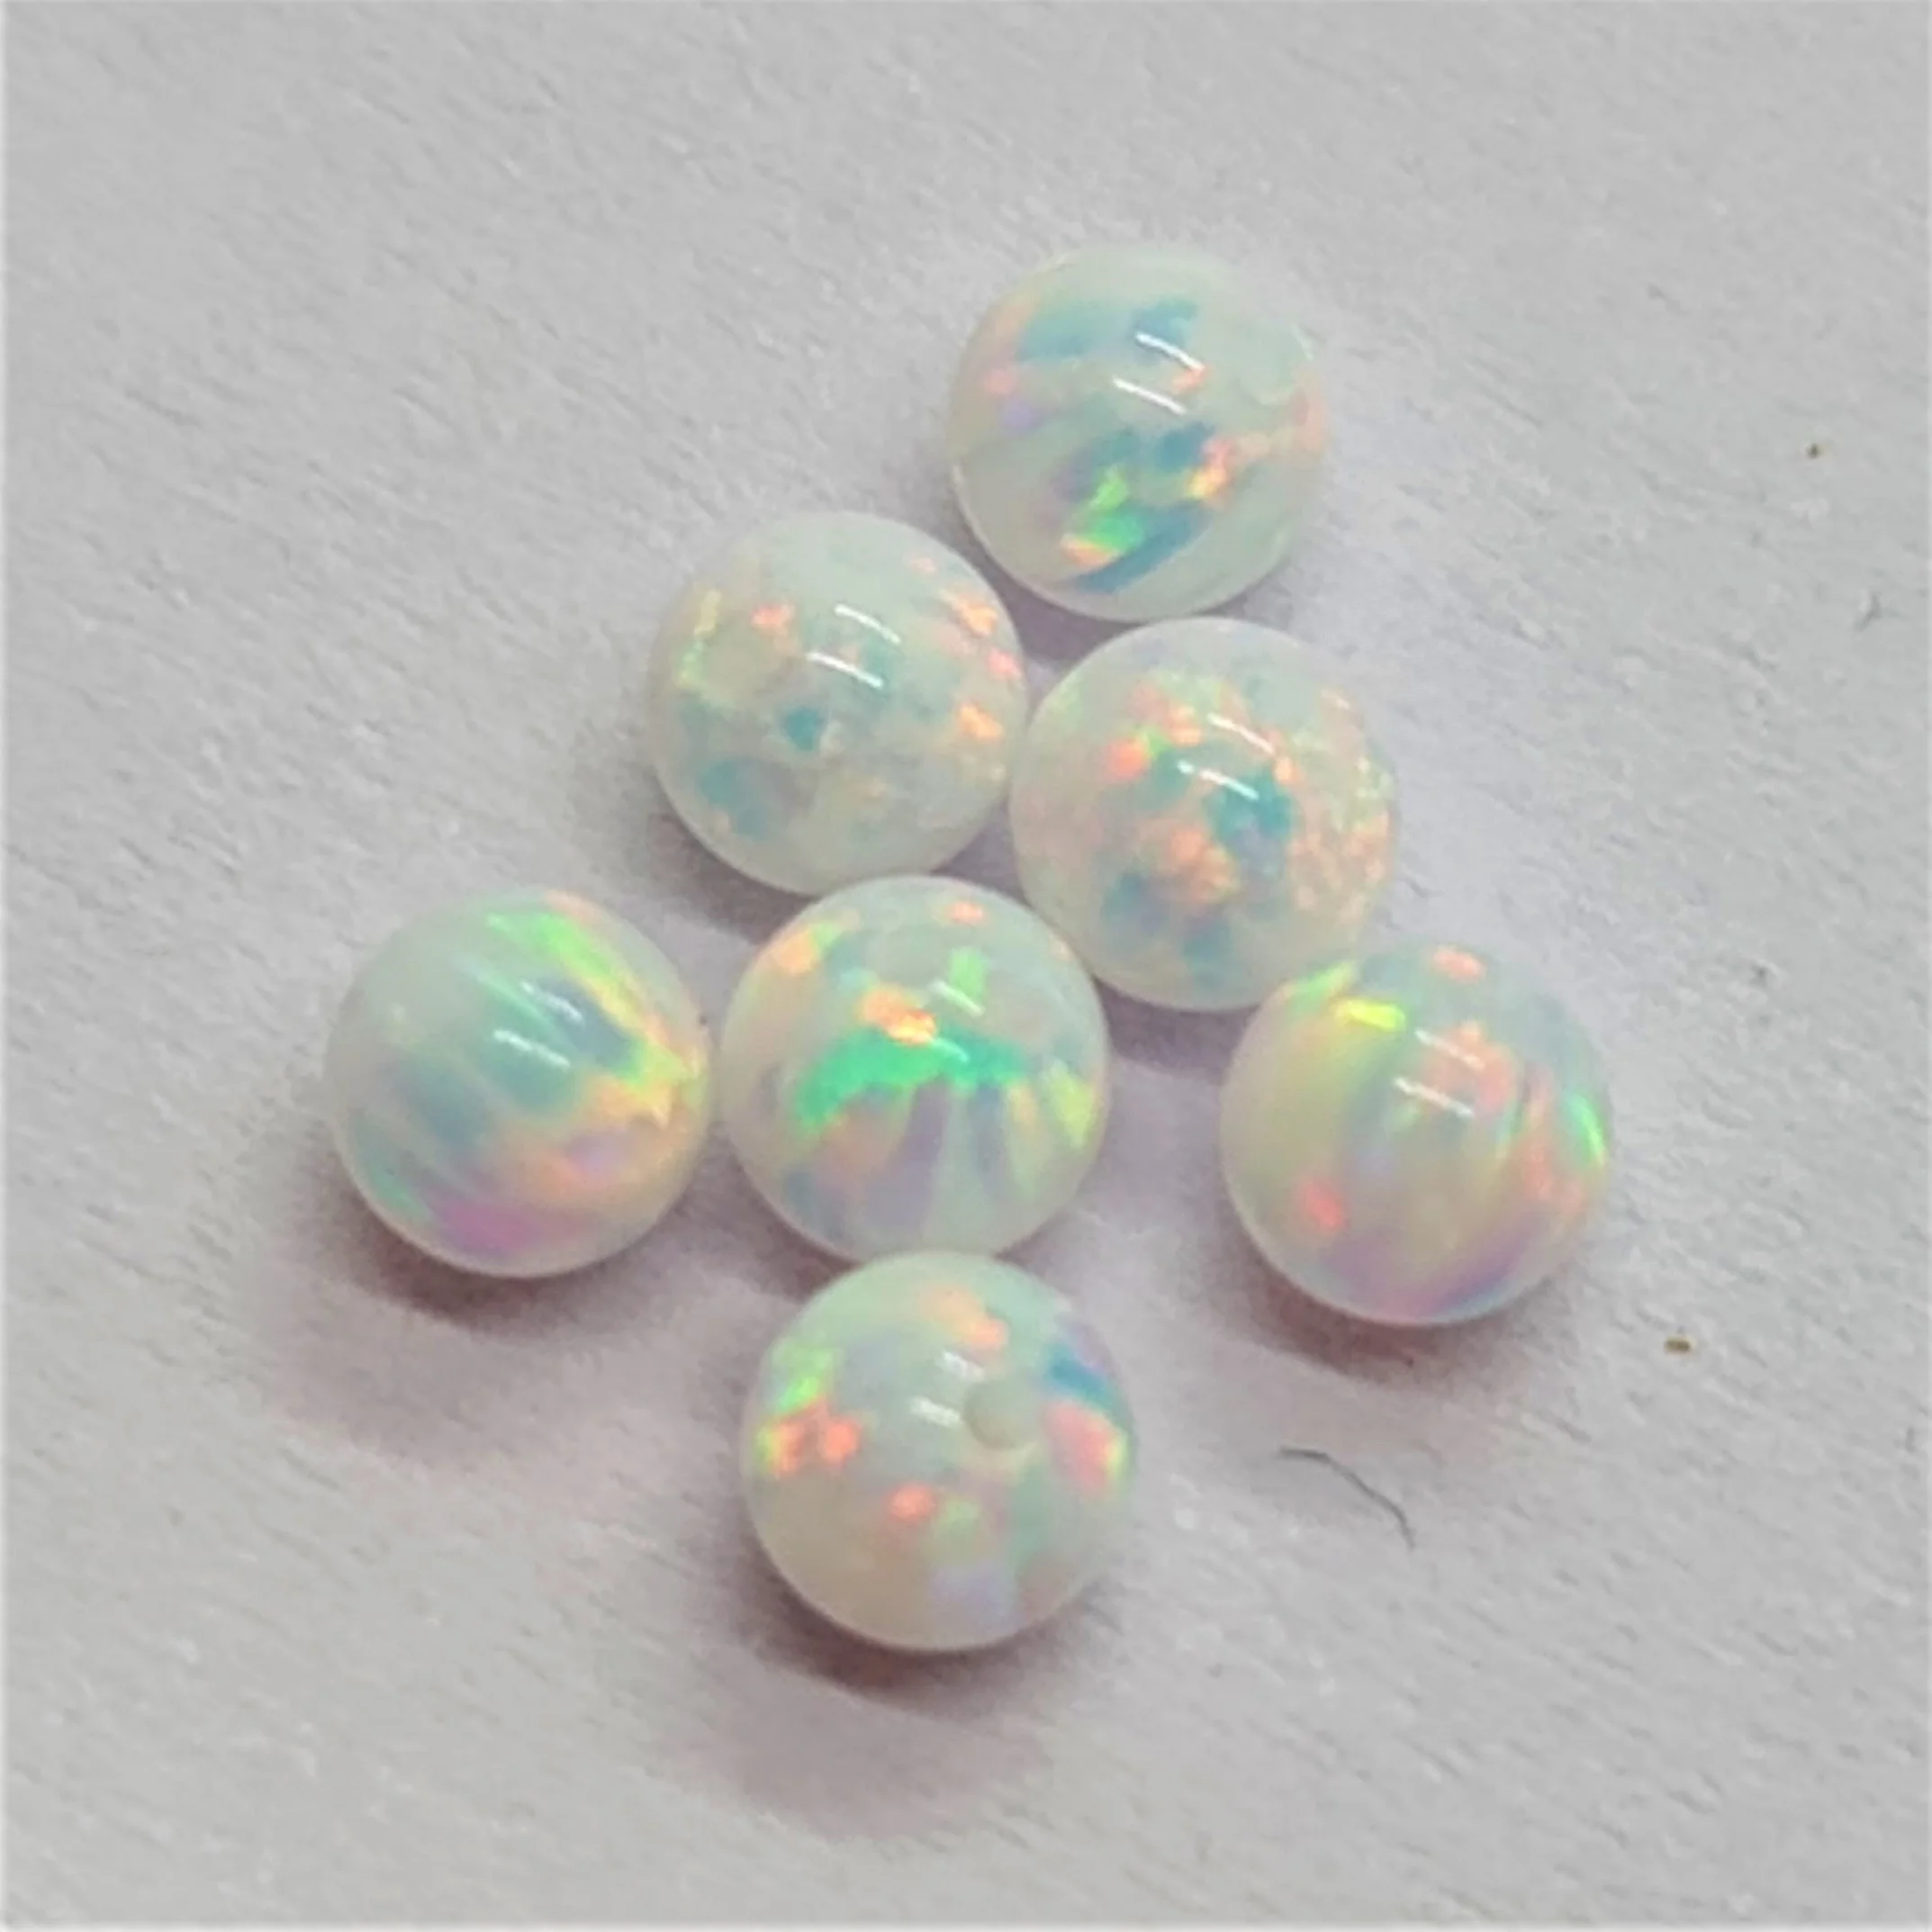 Loose Gemstone Synthetic Opal Ball Shaped Beads cut in all sizes till 15mm in other shapes and sizes as well